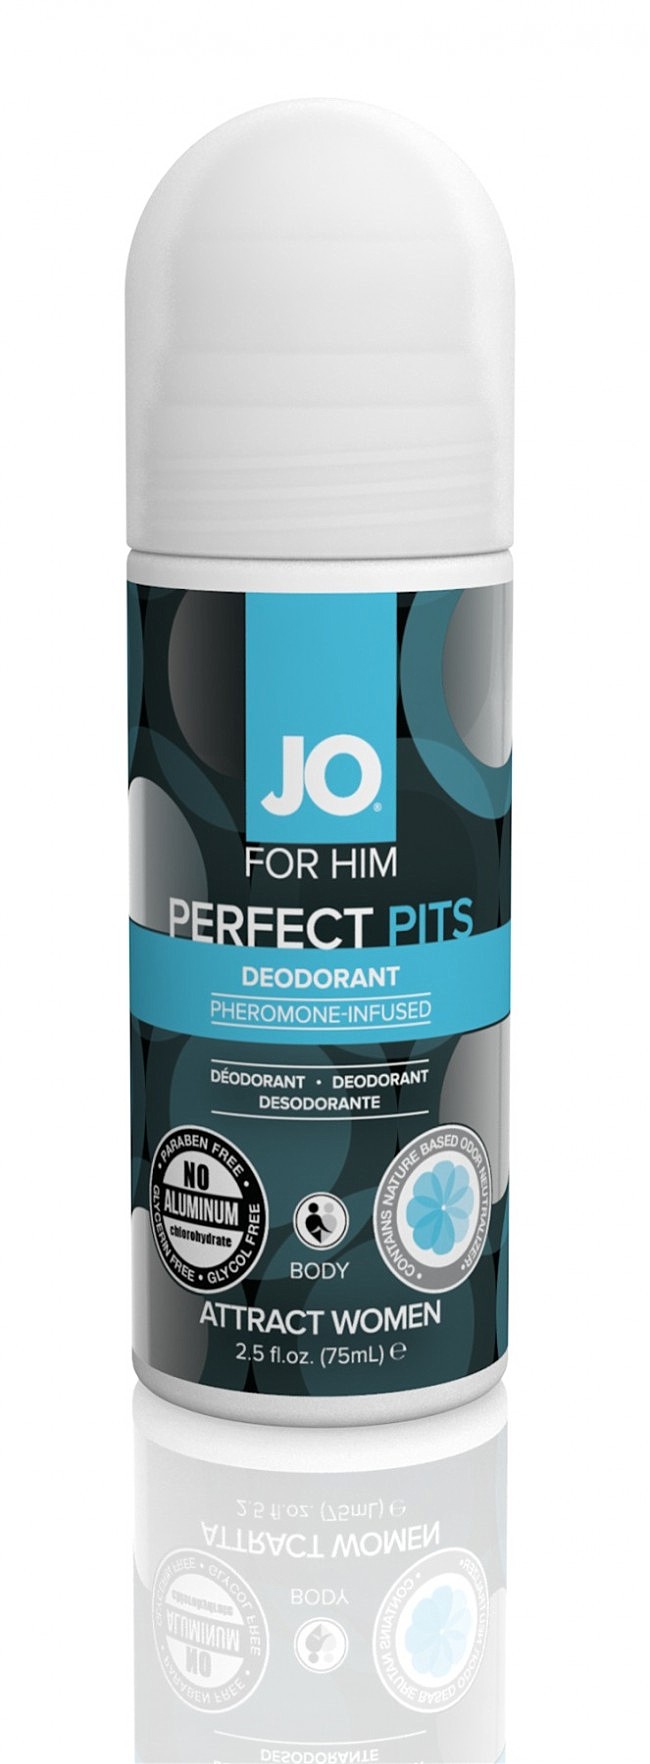      System JO PERFECT PITS FOR HIM, 75 